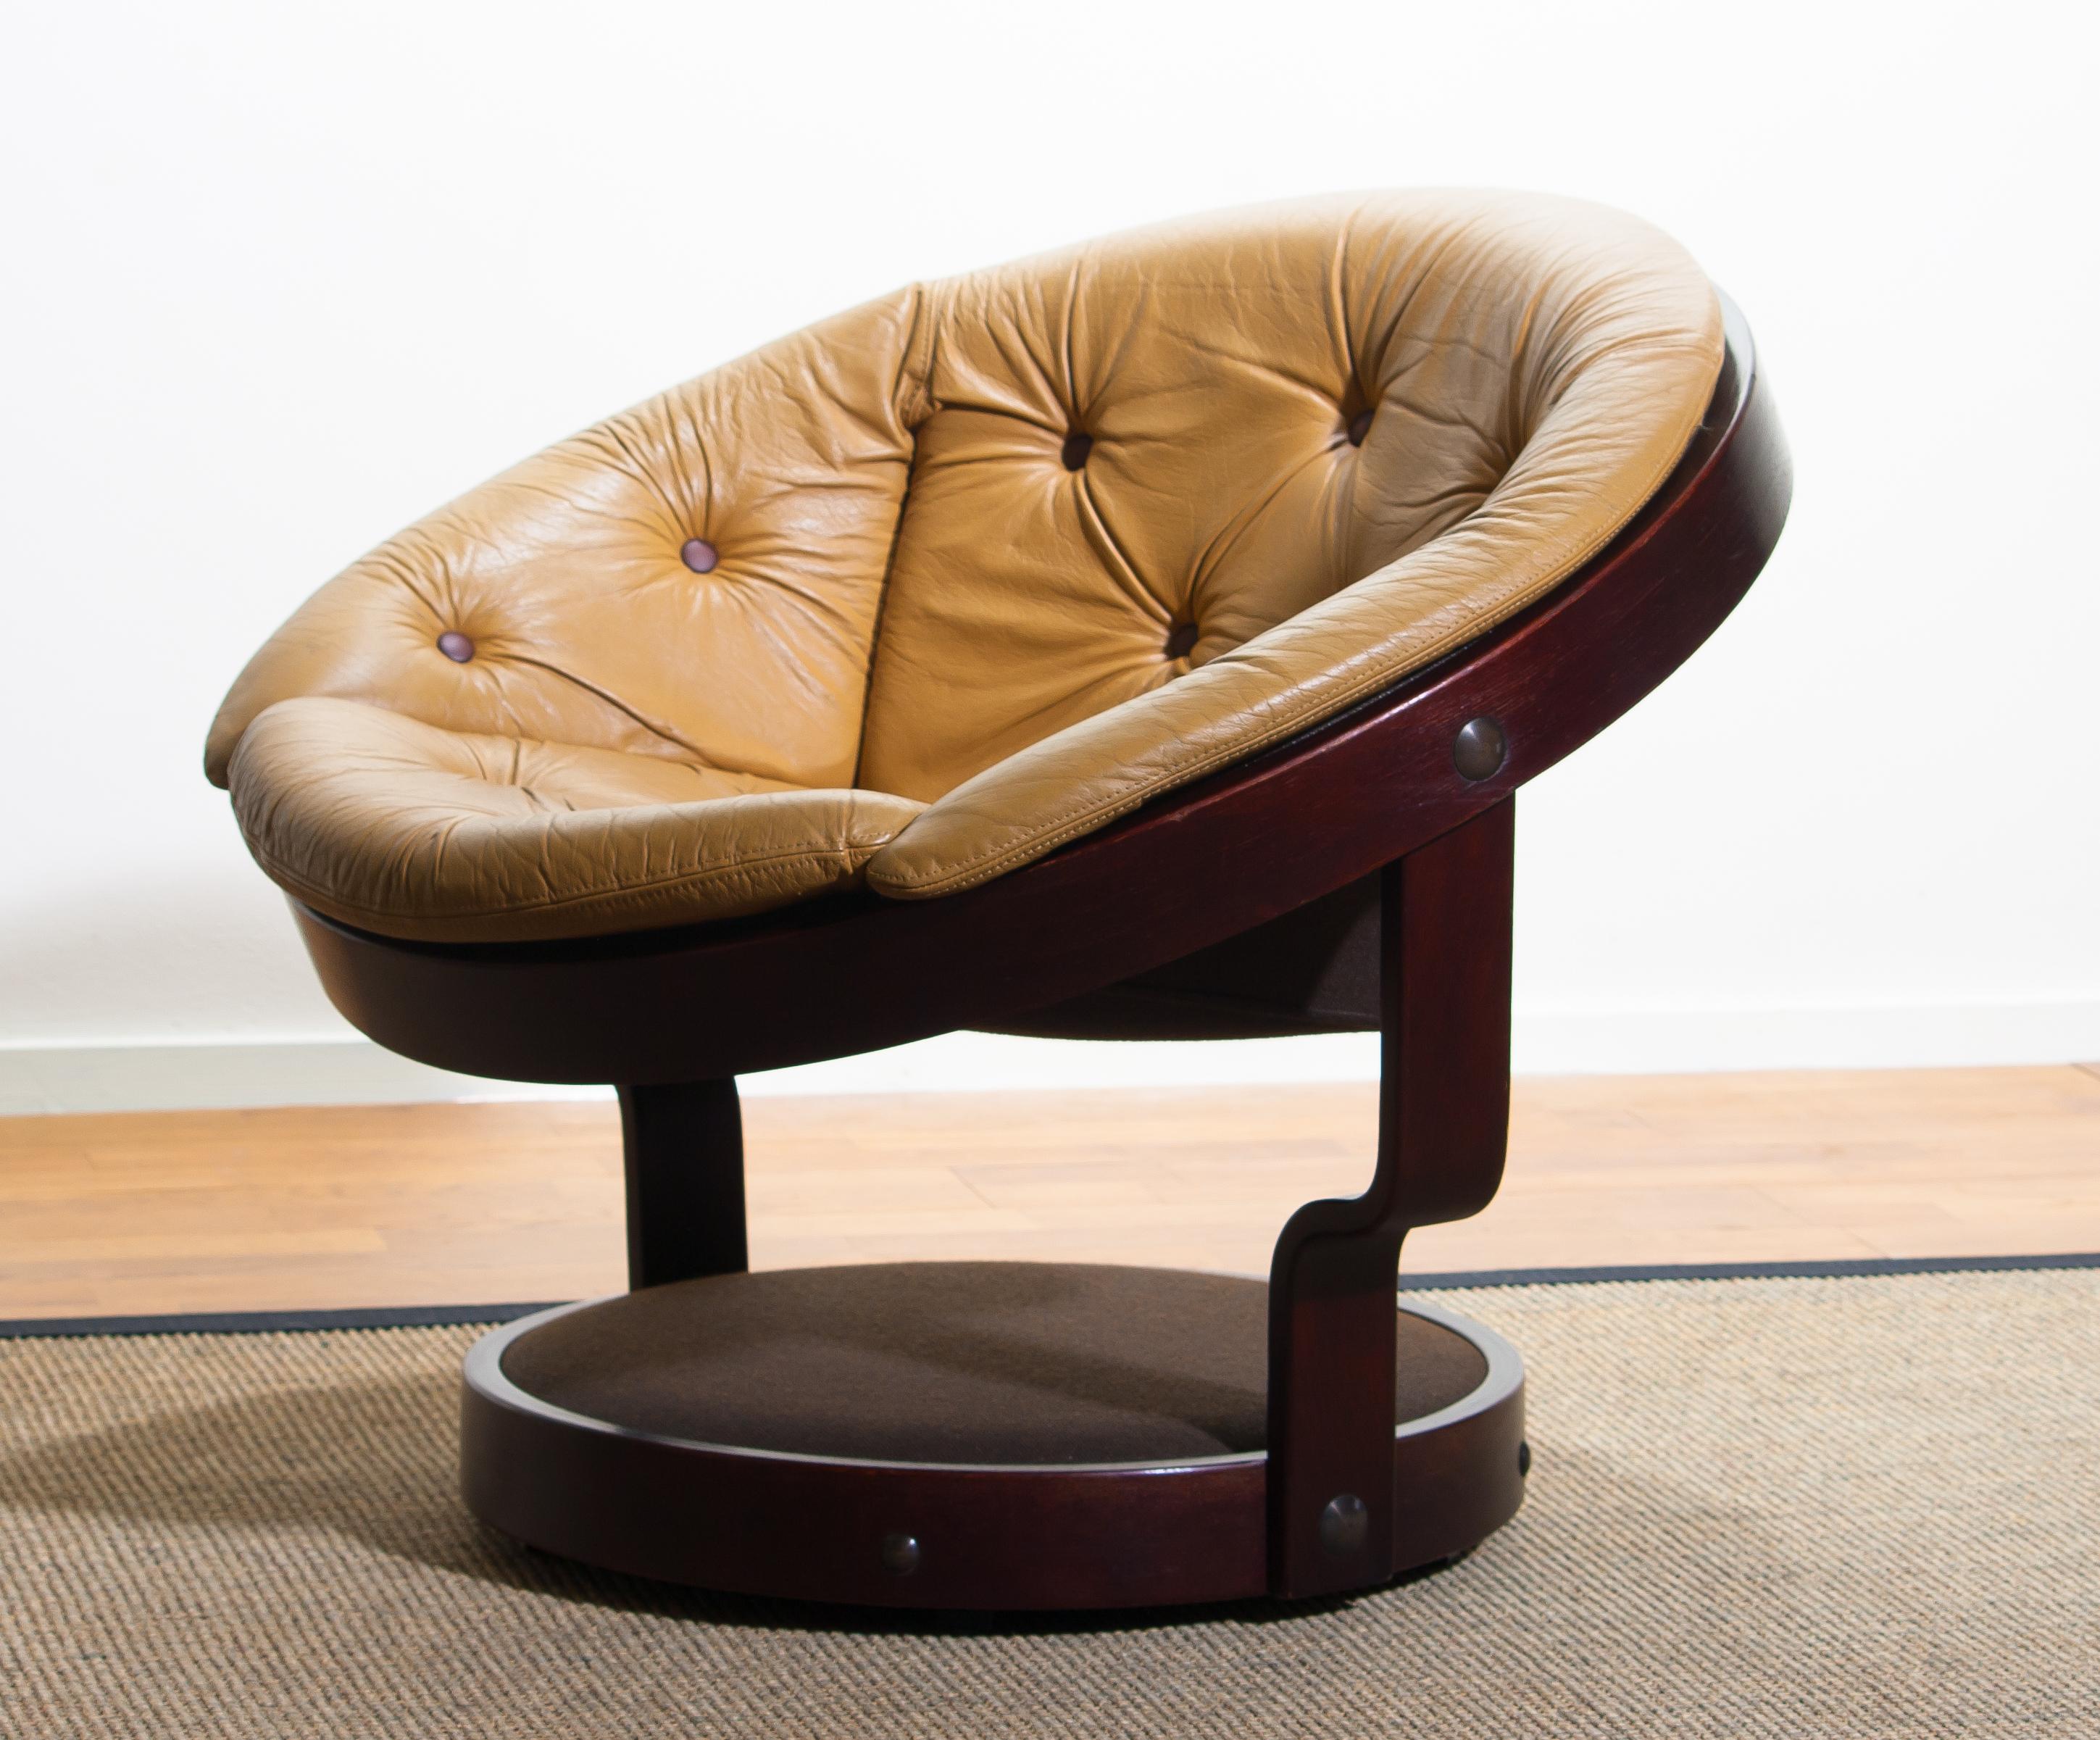 Norwegian 1970s Scandinavian Circle Shaped Swivel Chair by Oddmund Vad in Camel Leather